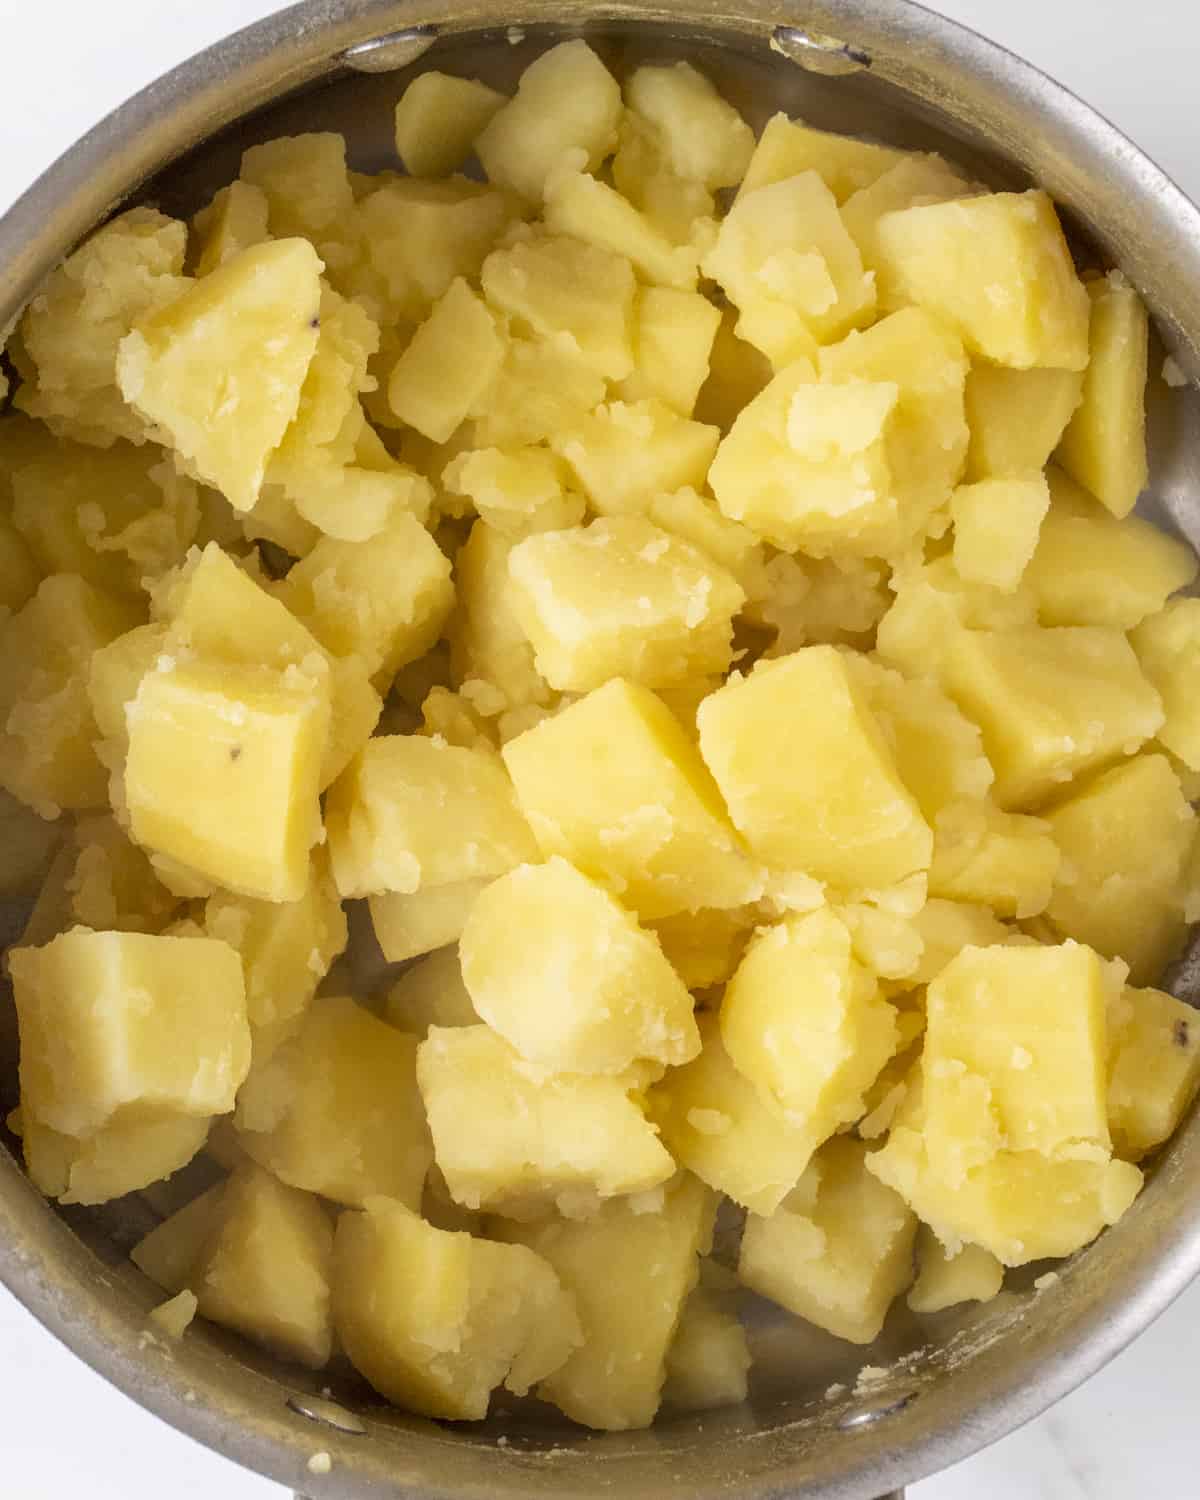 A large pot filled with the cubed potatoes that have been boiled.  